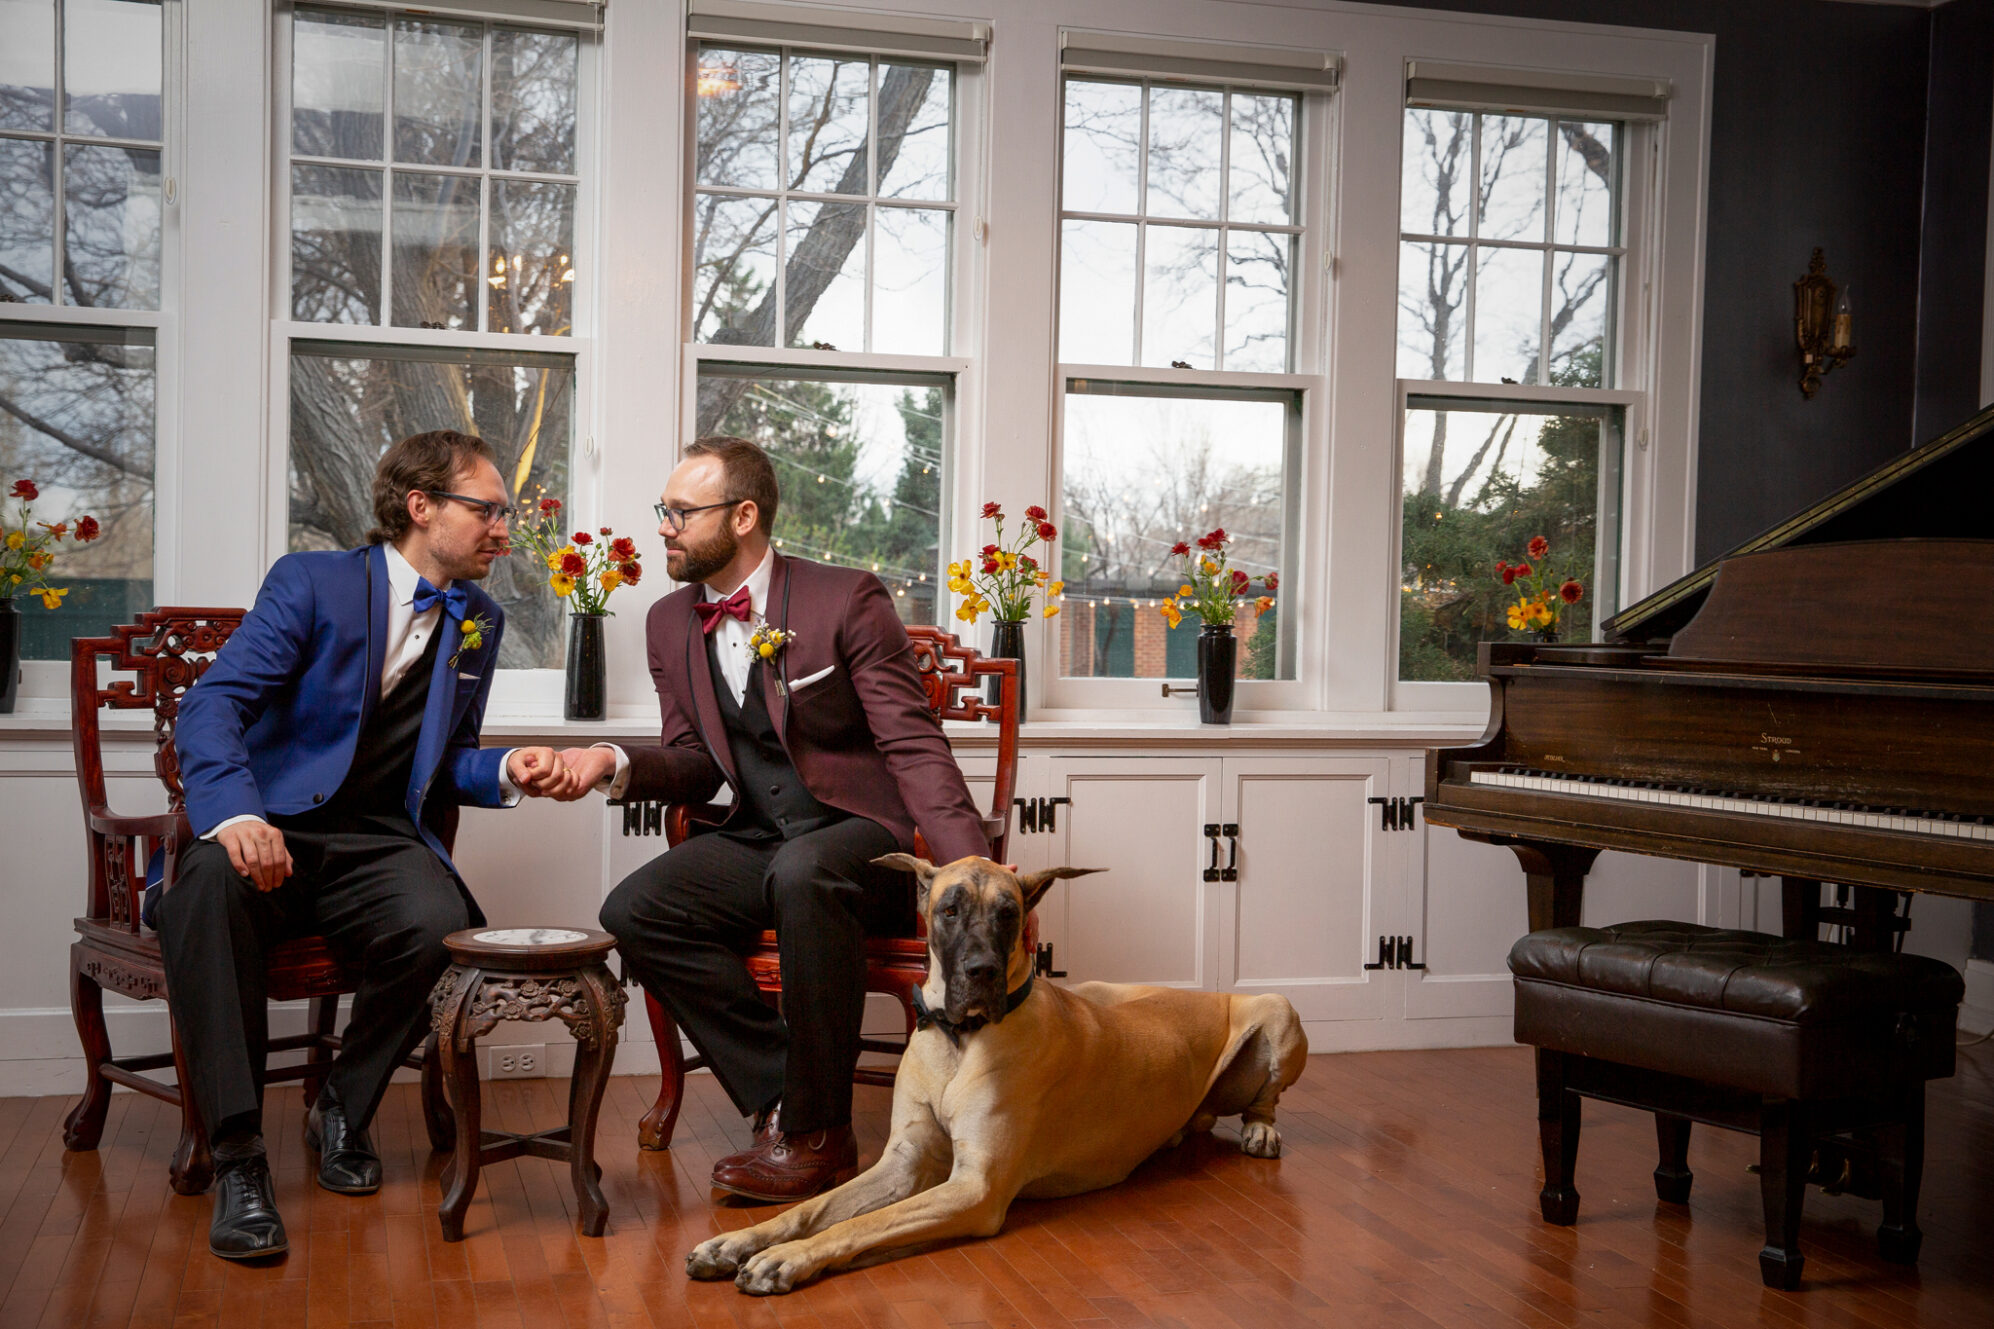 Same-Sex Marriage and styled shoot at Lionsgate Event Center by Colorado Wedding Photographer, All Digital Photo & Video. Colorado Wedding Photographer, Colorado Wedding Photo, Colorado Wedding, Wedding Photography